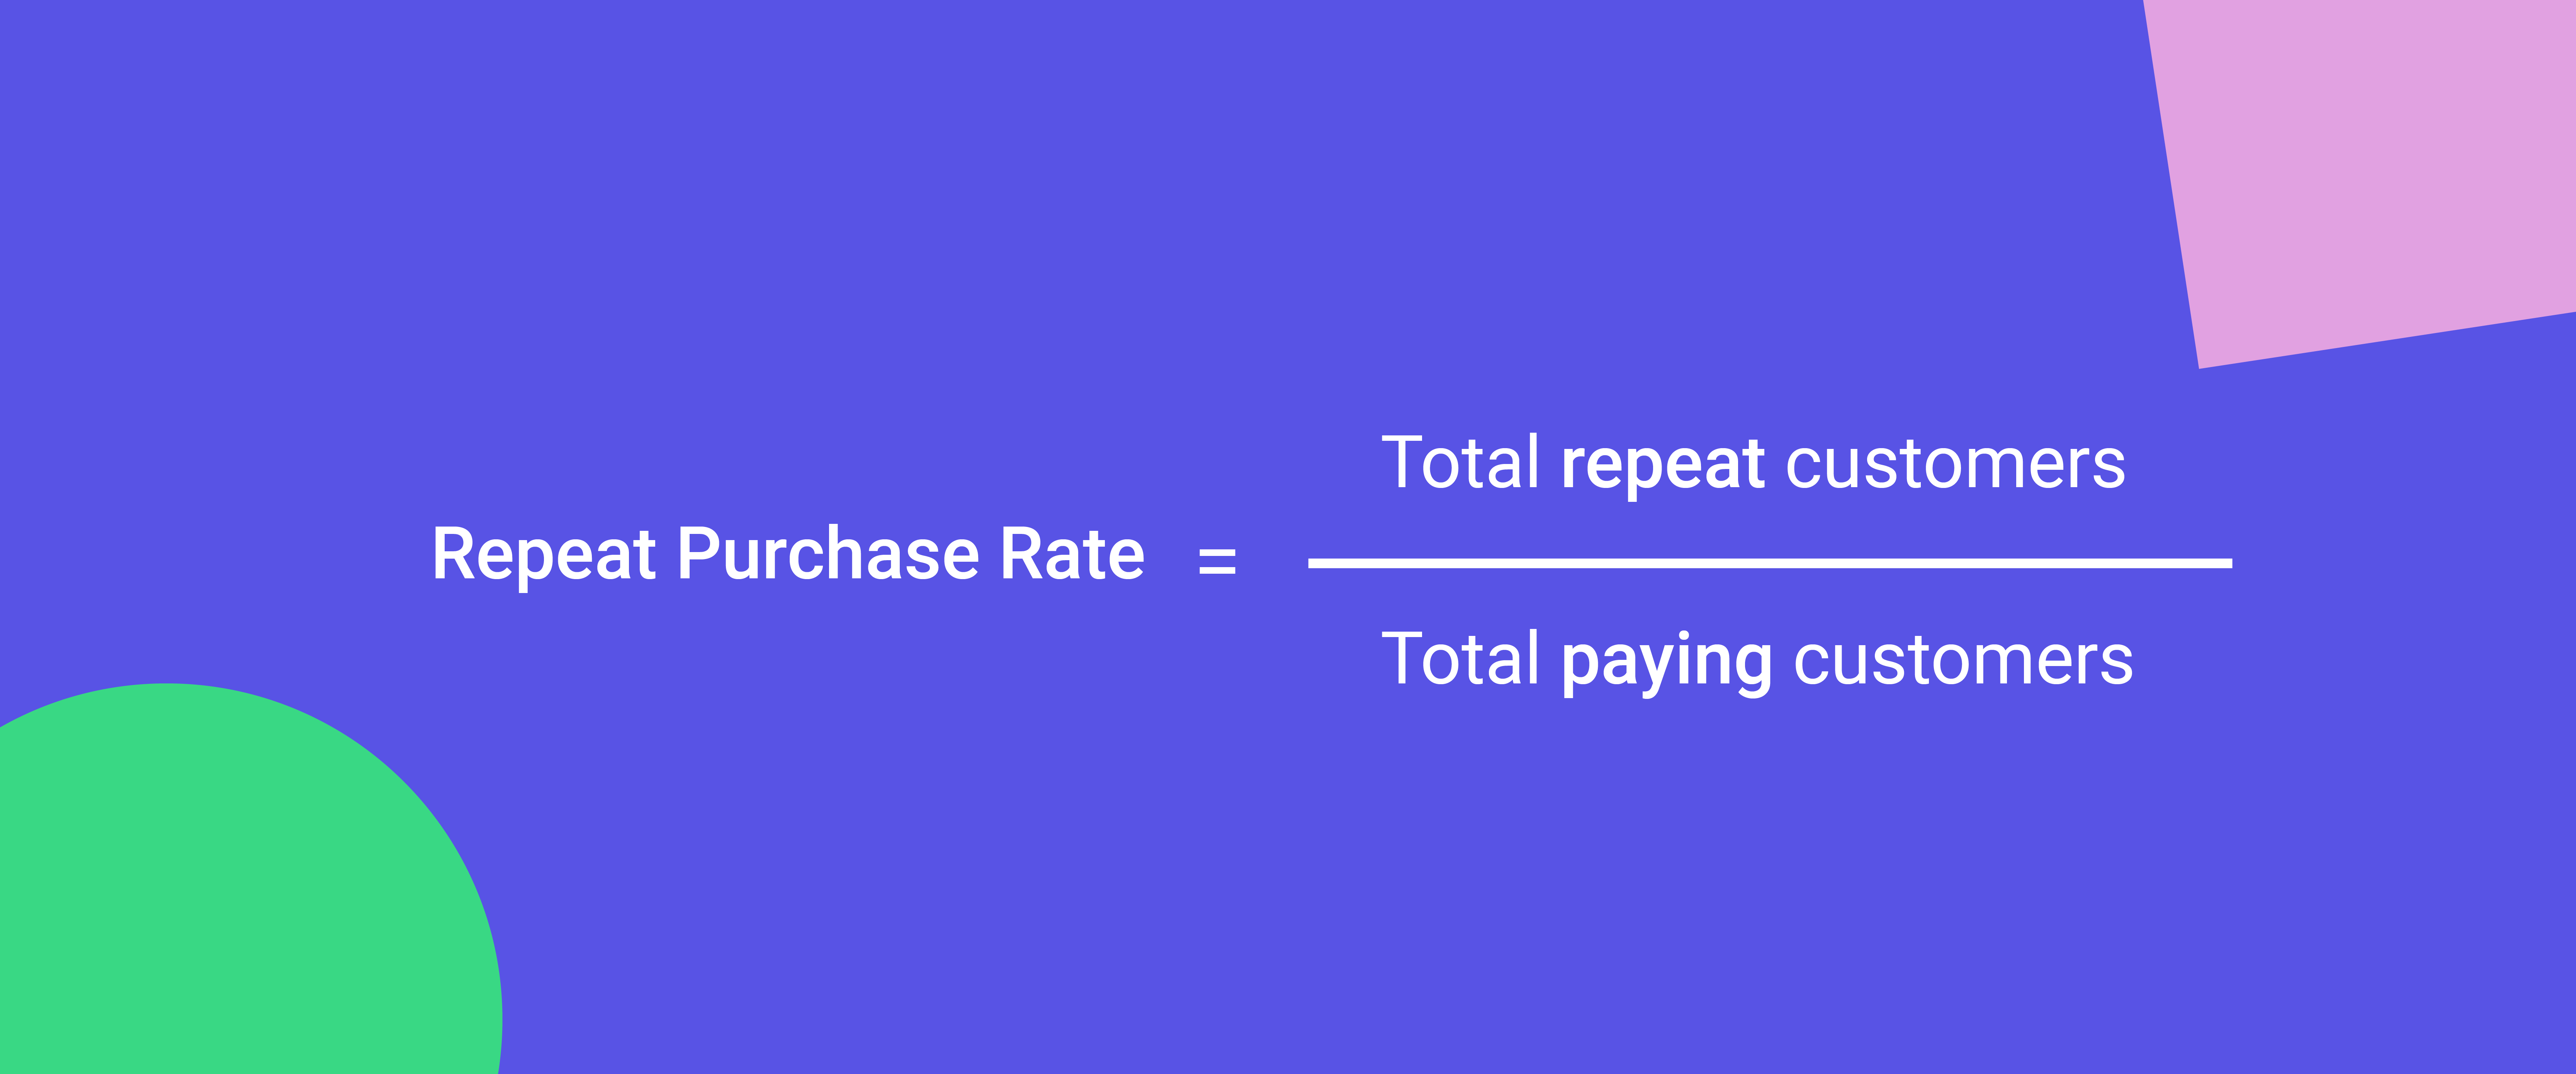 repeat purchase rate calculation